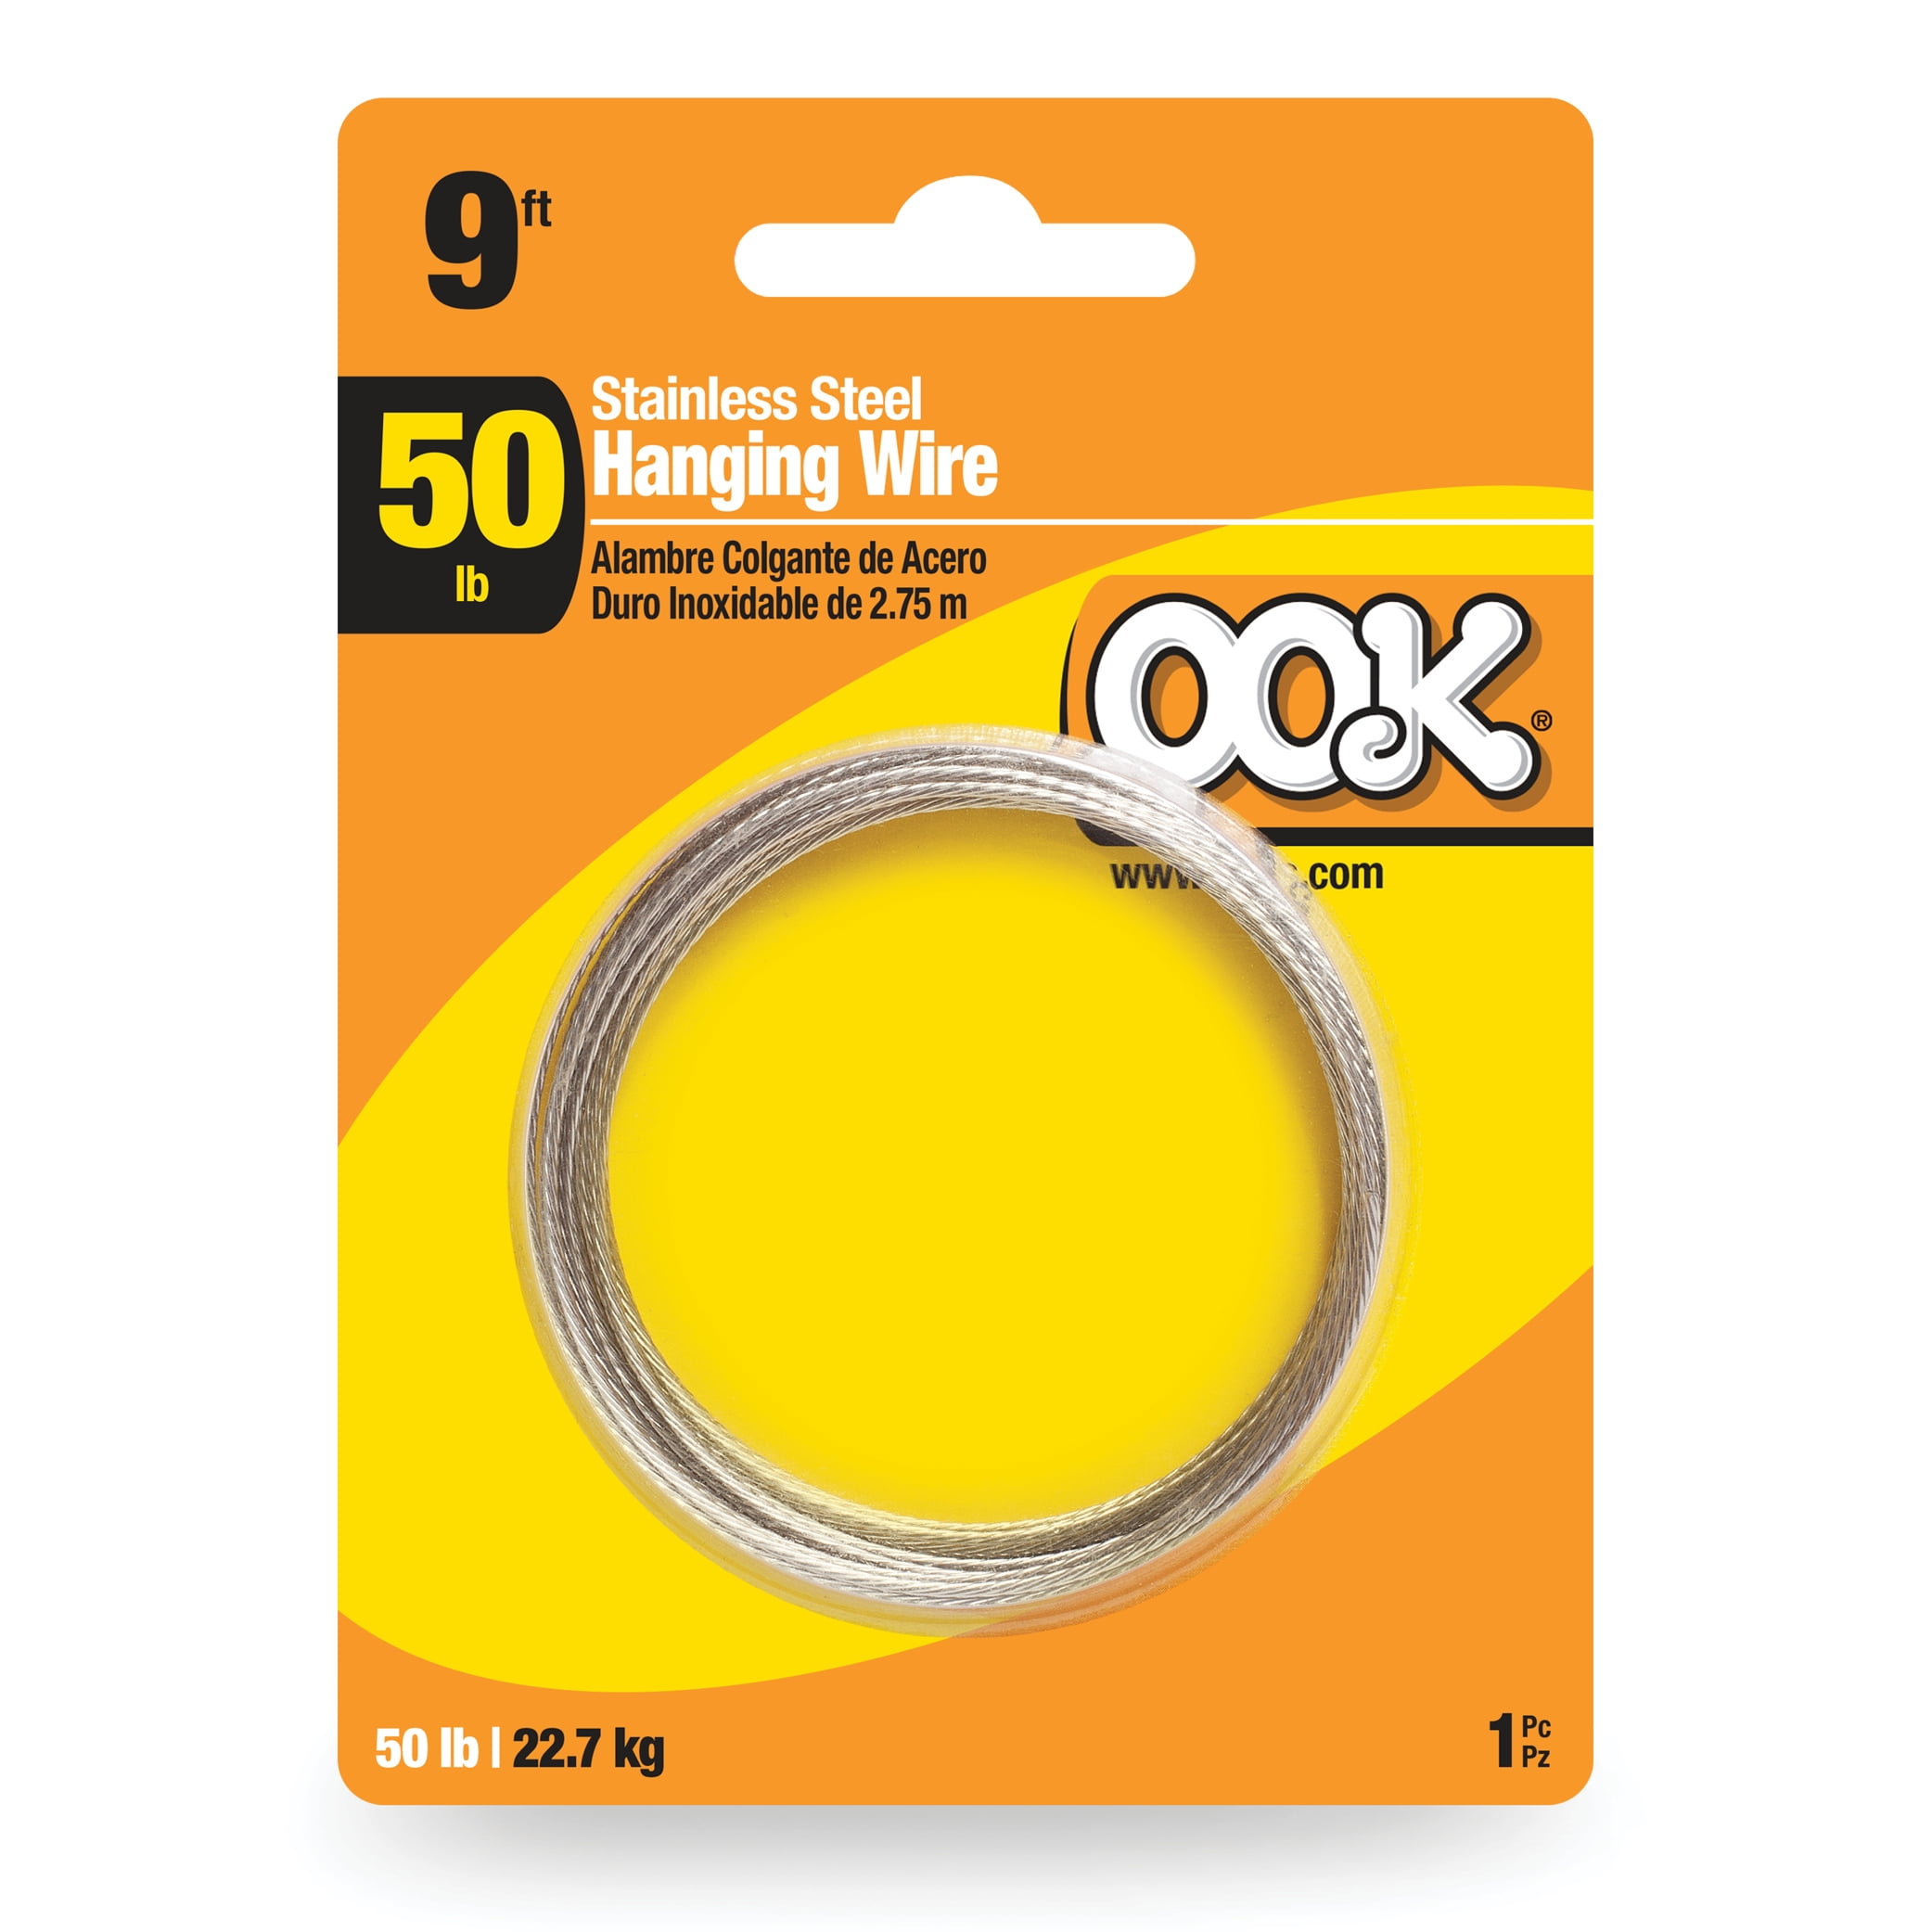 OOK 50120 Picture Hanging Wire, 9 ft L, Galvanized Steel, 5 lb 12 Pack  #VORG1759570, 50120